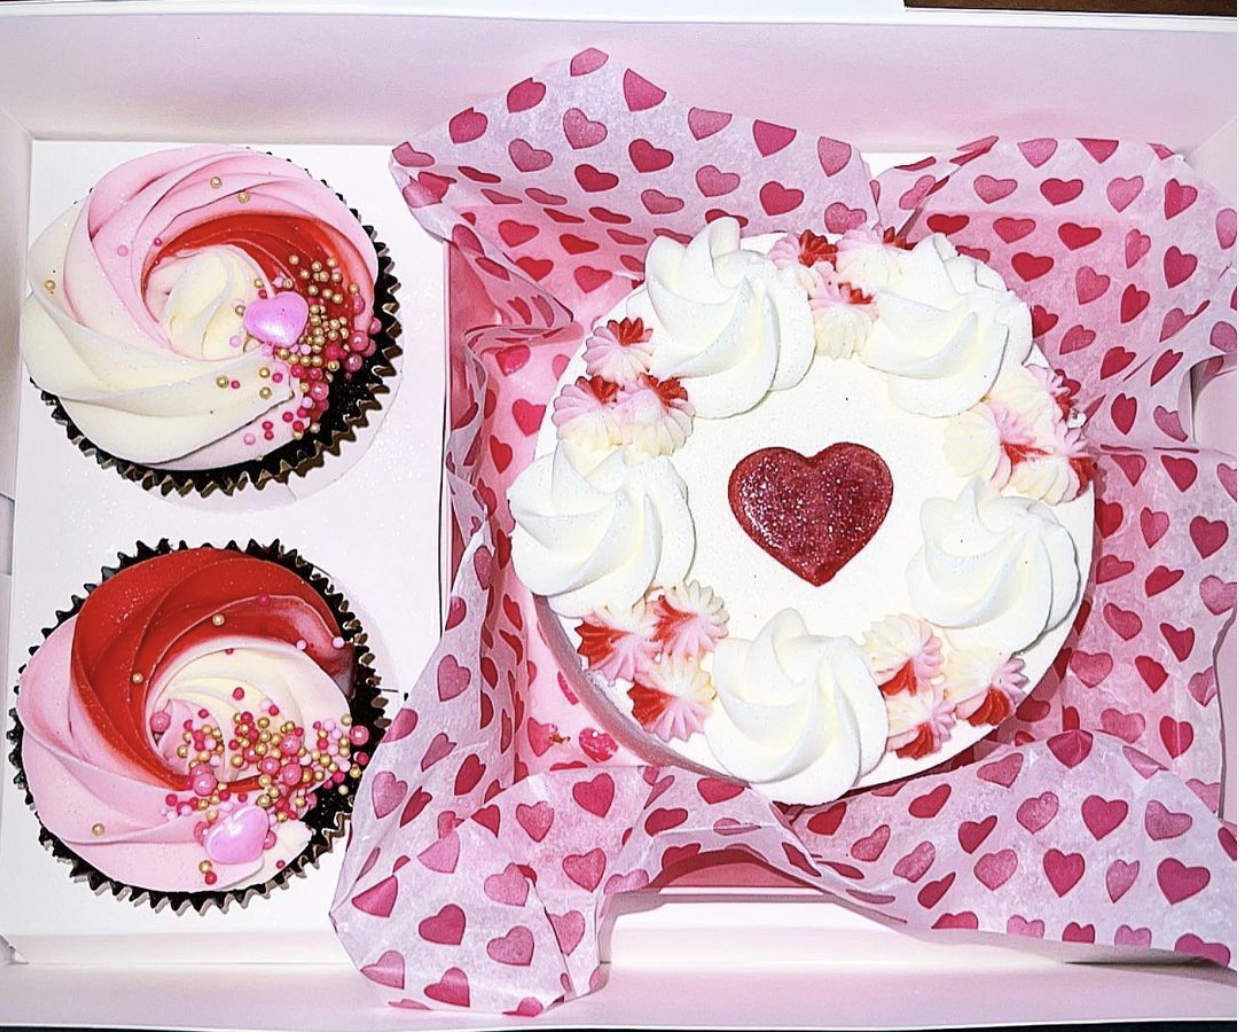 SimasBaking_Valentine’s special dessert box - Mini vanilla cake wrapped with Swiss vanilla buttercream and 2 chocolate chips cupcakes topped with Swiss vanilla buttercream.png